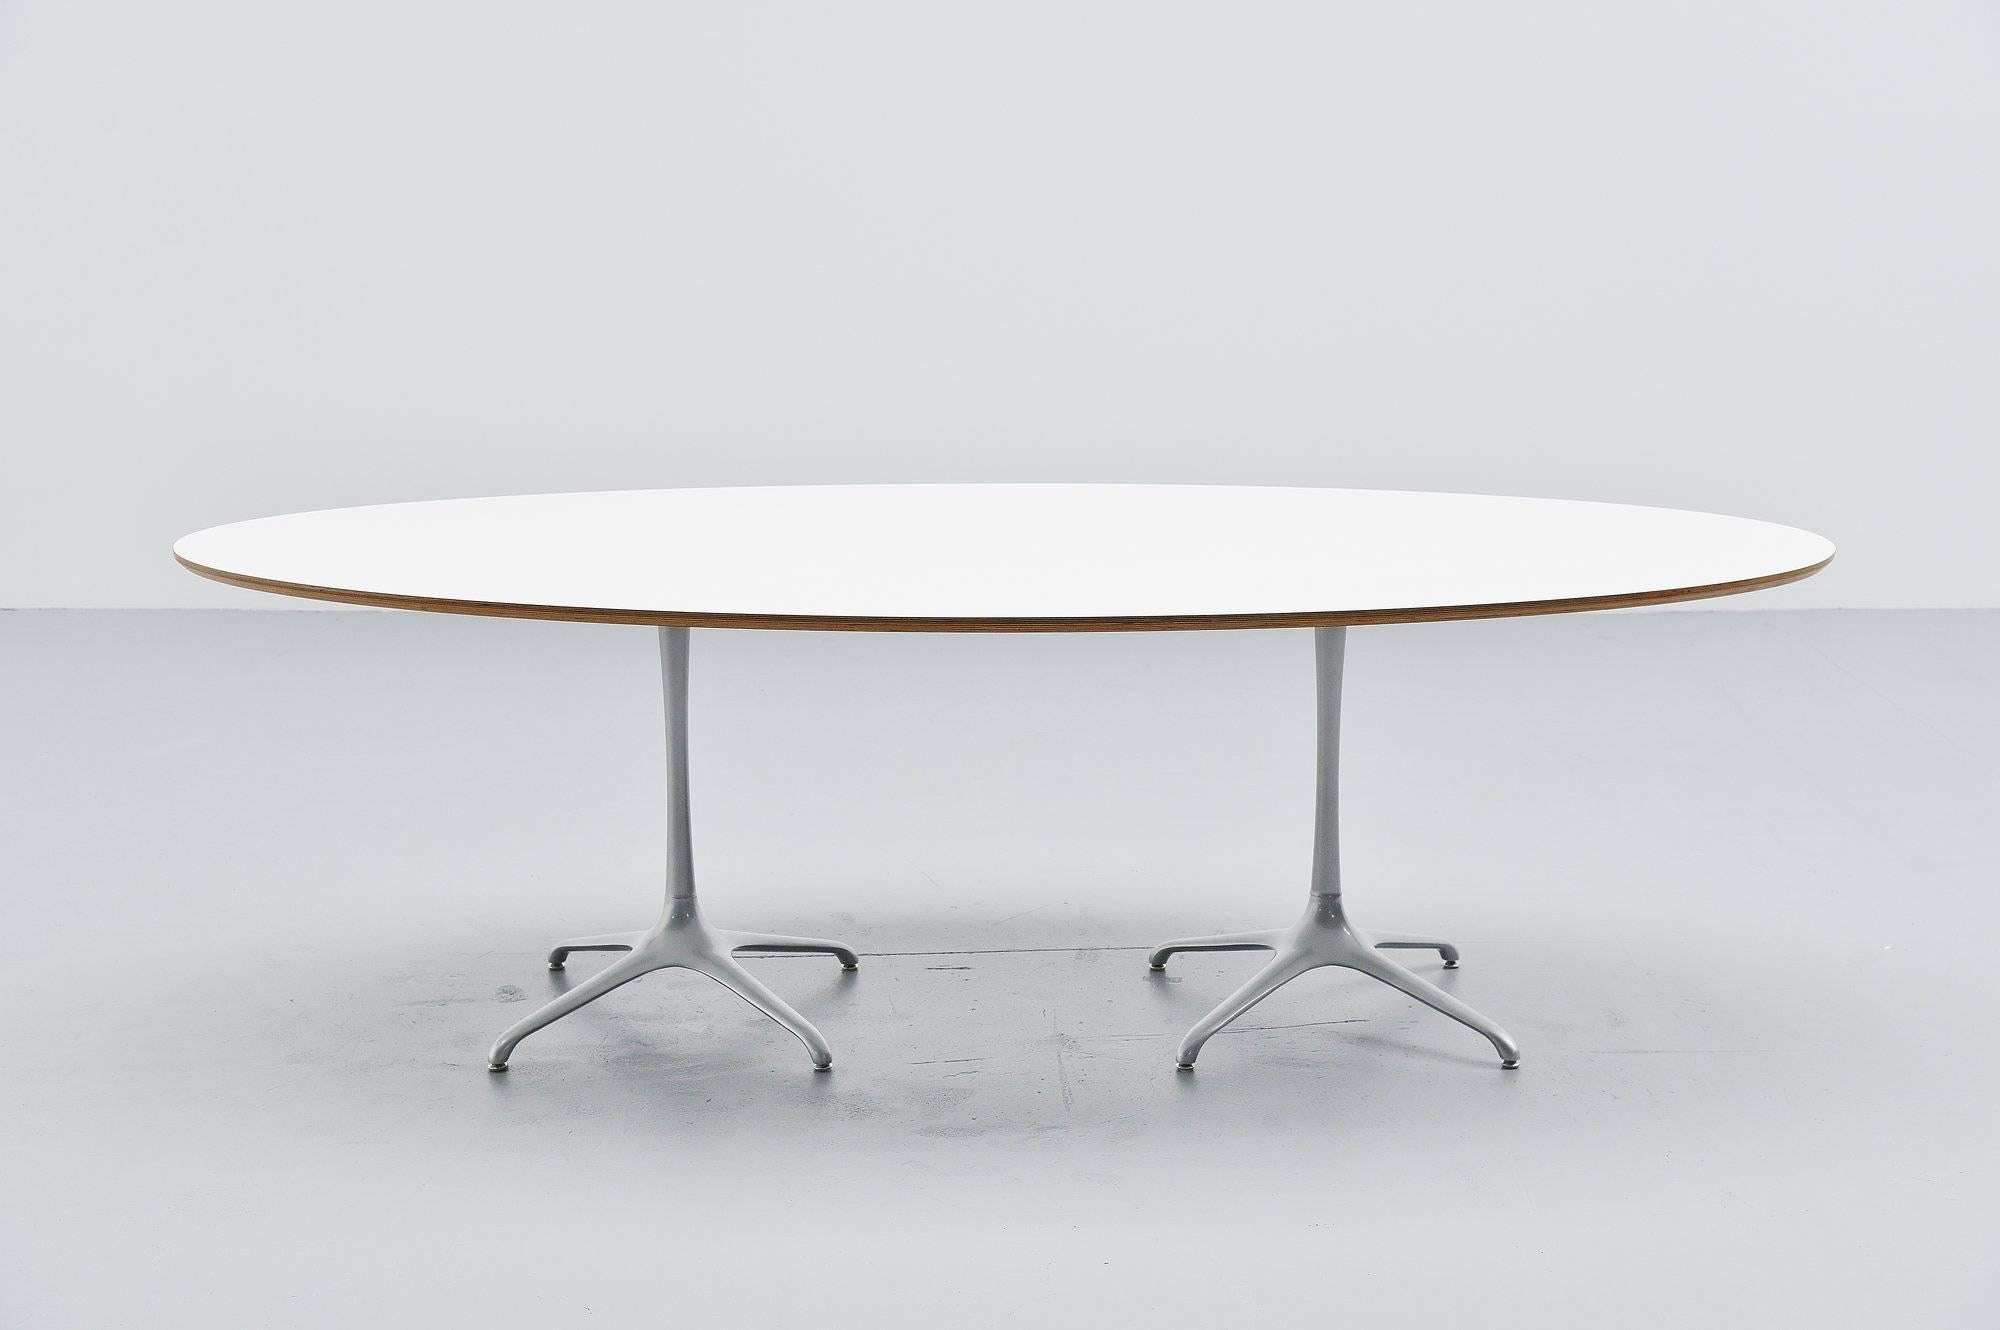 Super rare dining table designed by Ross Lovegrove and manufactured by Bernhardt Design, USA 1997. This table was only made on request to match with the famous Go chairs designed by Ross Lovegrove, so not much of these were made. We have purchased